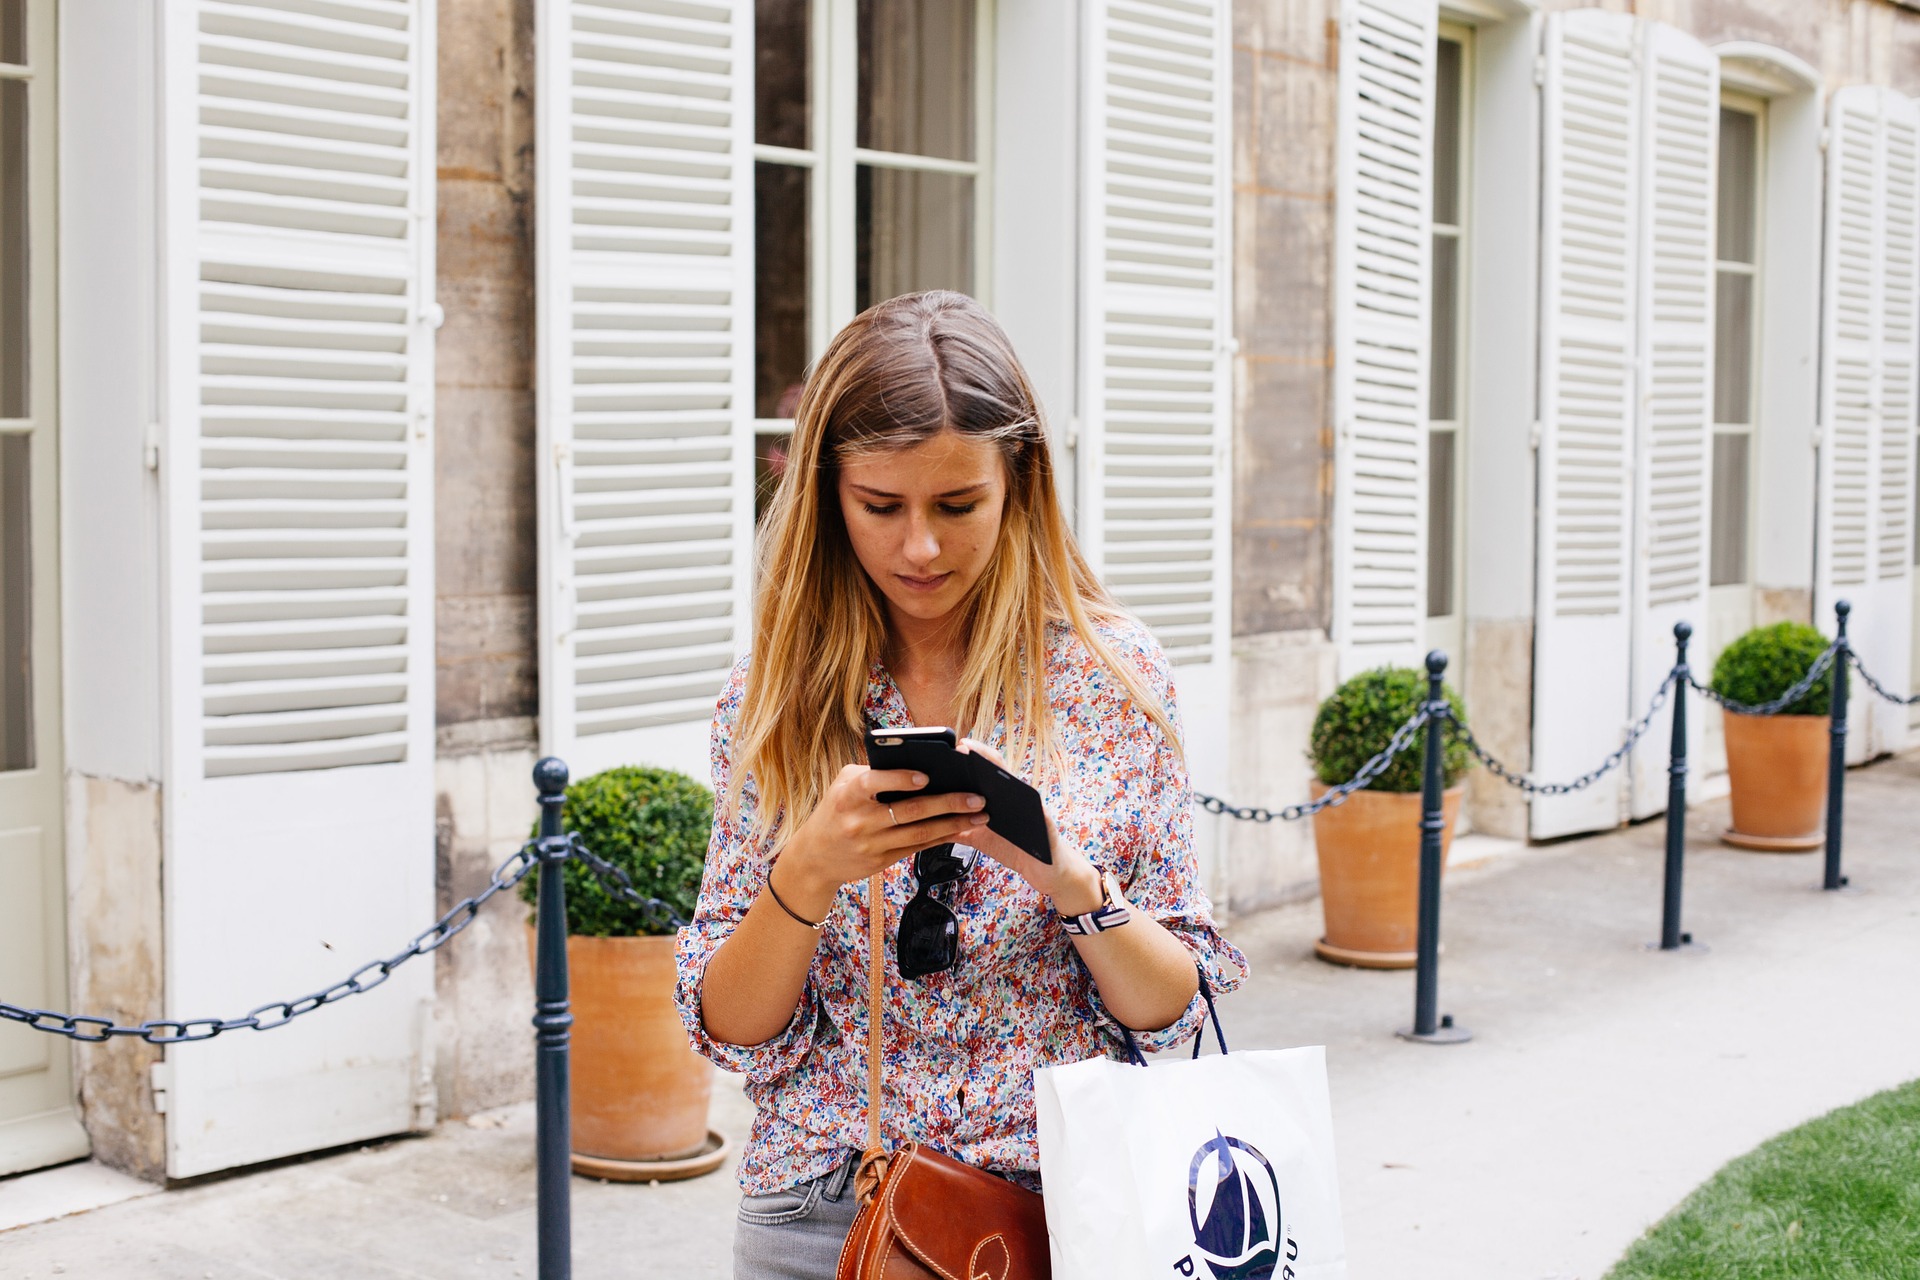 How retailers can harness the power of location intelligence to improve customer experiences